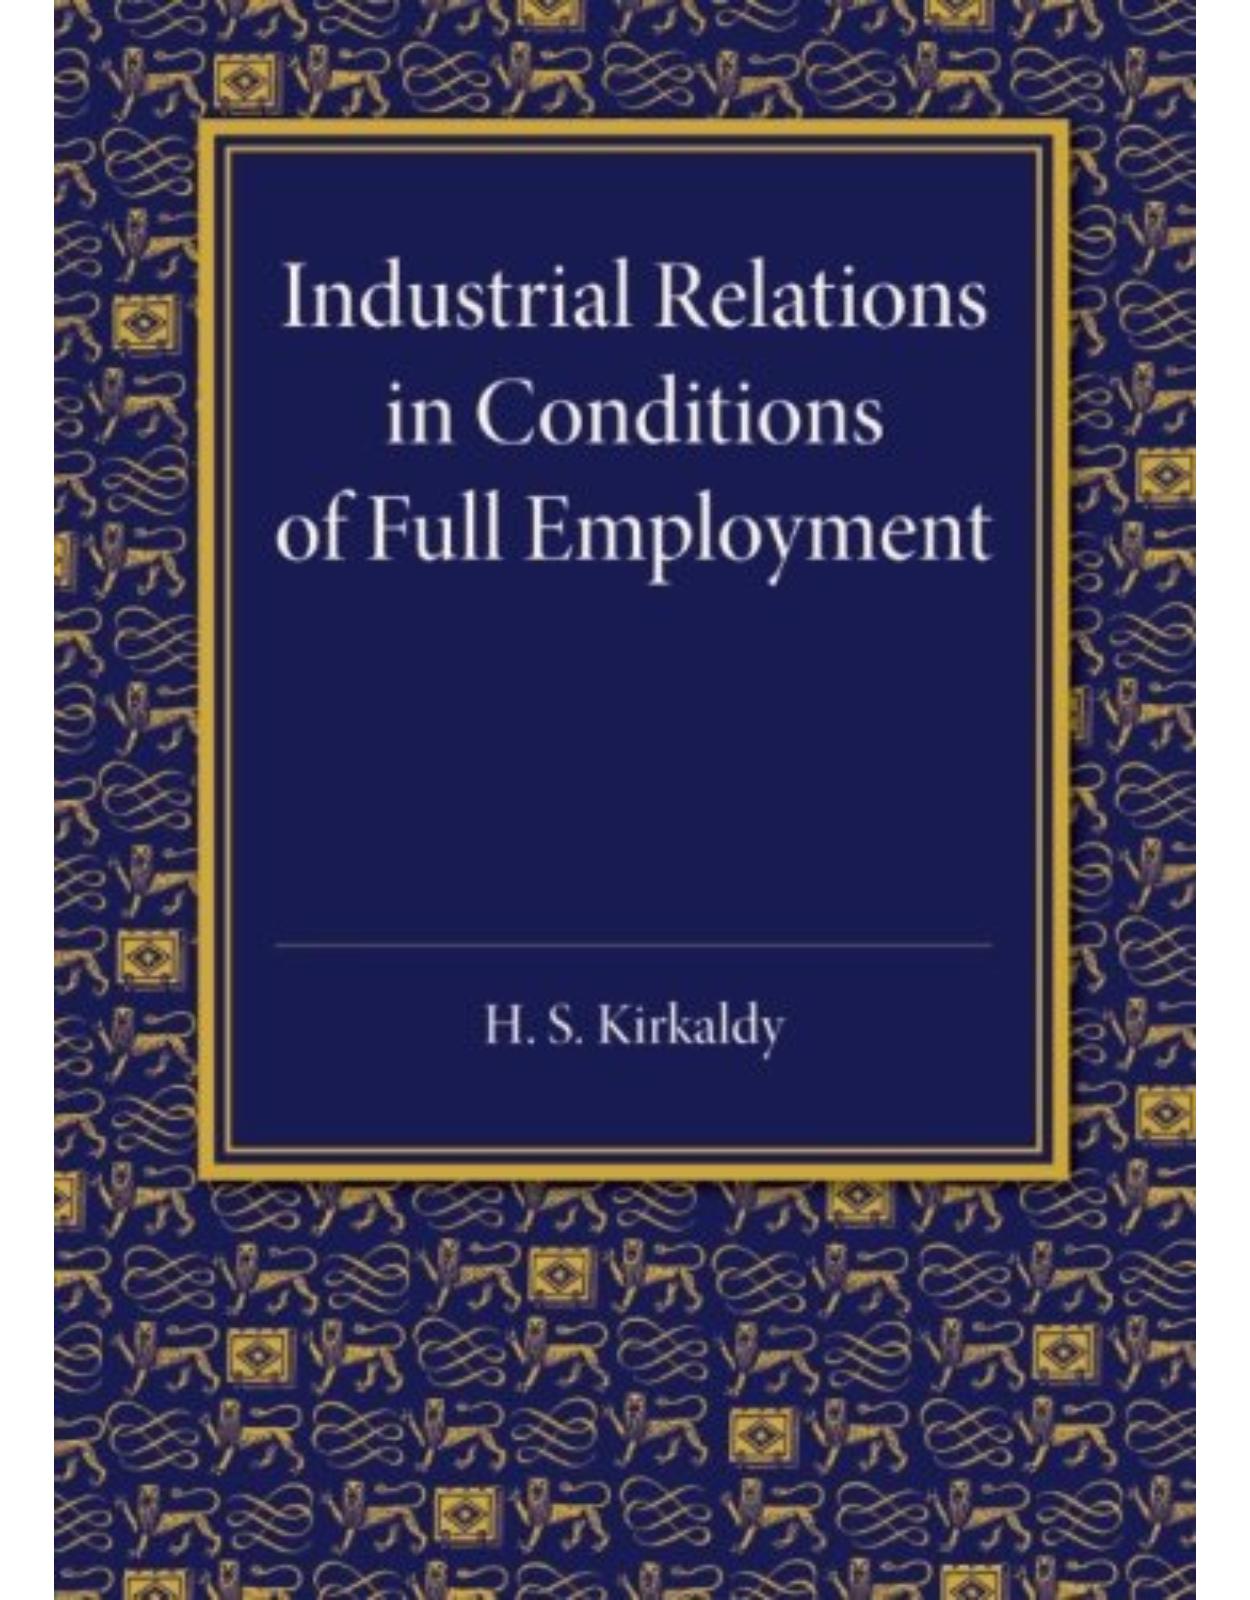 Industrial Relations in Conditions of Full Employment: An Inaugural Lecture Delivered at Cambridge on 16 October 1945